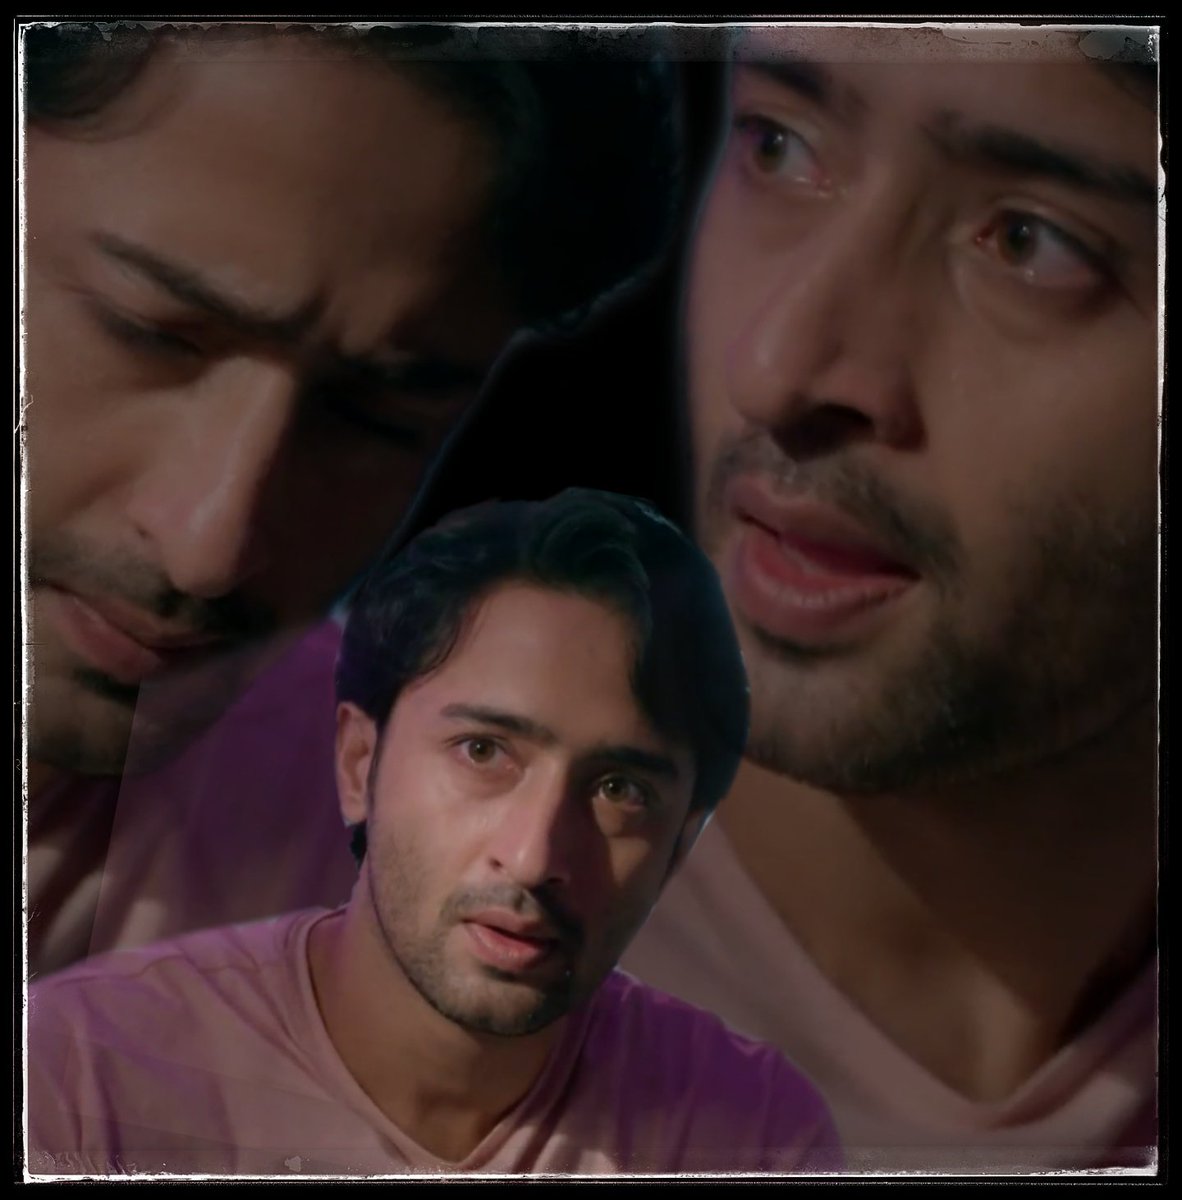 We could feel the emo turmoil Abir was going through.Though he agreed to moving out,yet in his heart he wasn't able to come to terms with this decision. His angst,pain of separation was beautifully expressed through eyes and body language .No words required #ShaheerSheikh Kudos